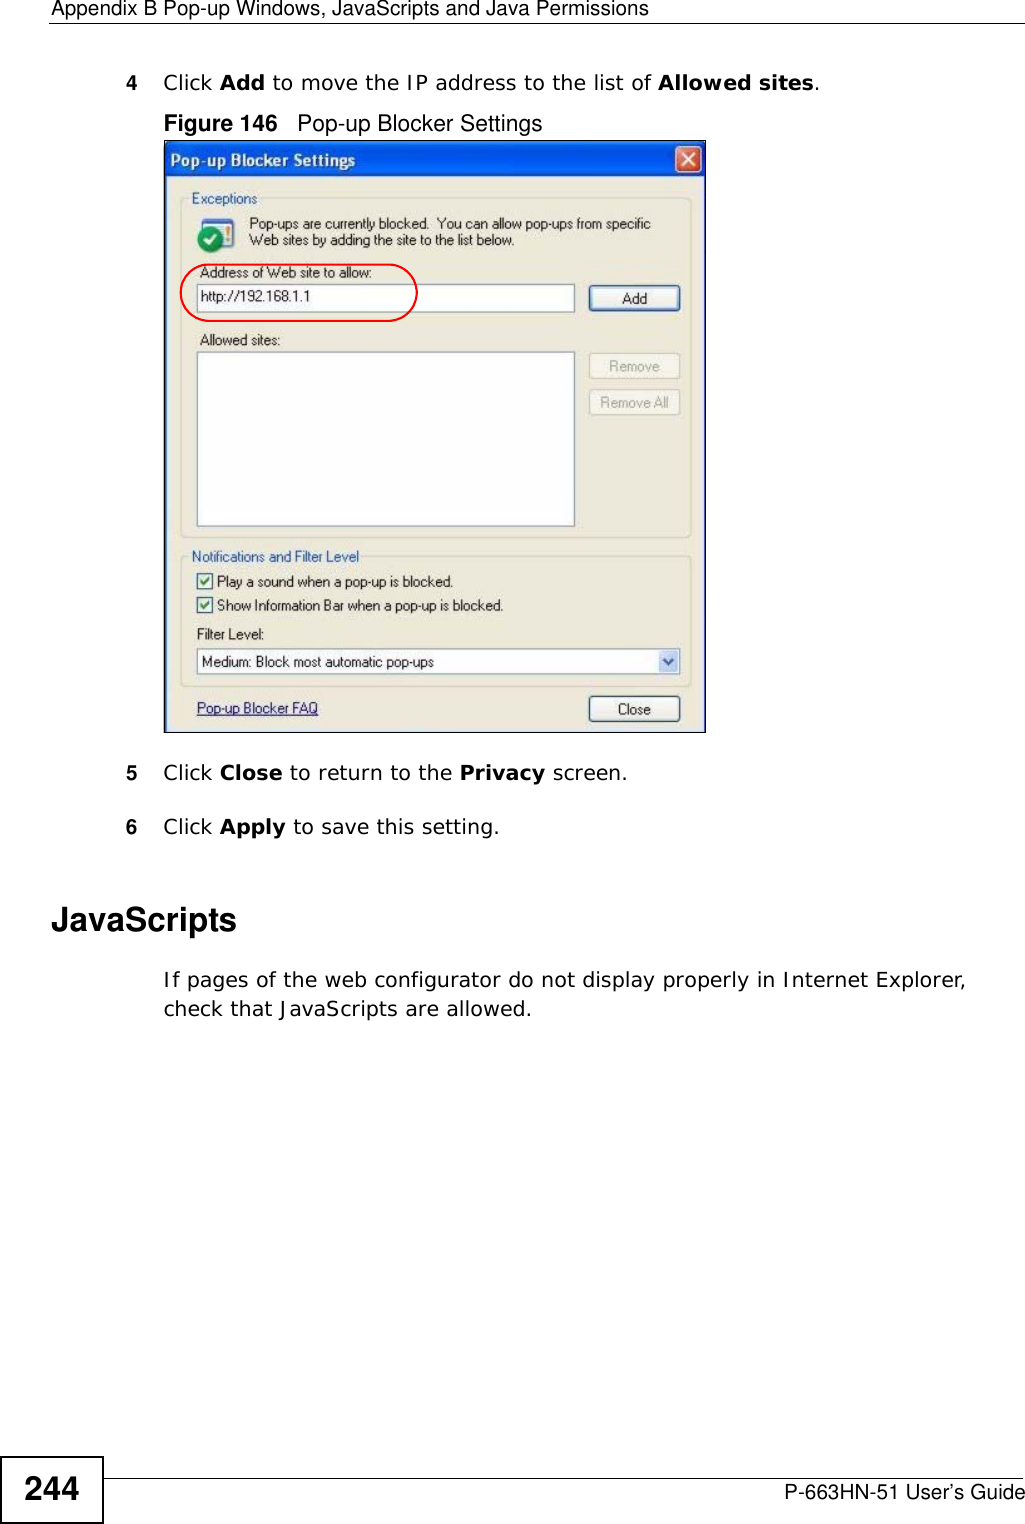 Appendix B Pop-up Windows, JavaScripts and Java PermissionsP-663HN-51 User’s Guide2444Click Add to move the IP address to the list of Allowed sites.Figure 146   Pop-up Blocker Settings5Click Close to return to the Privacy screen. 6Click Apply to save this setting. JavaScriptsIf pages of the web configurator do not display properly in Internet Explorer, check that JavaScripts are allowed. 